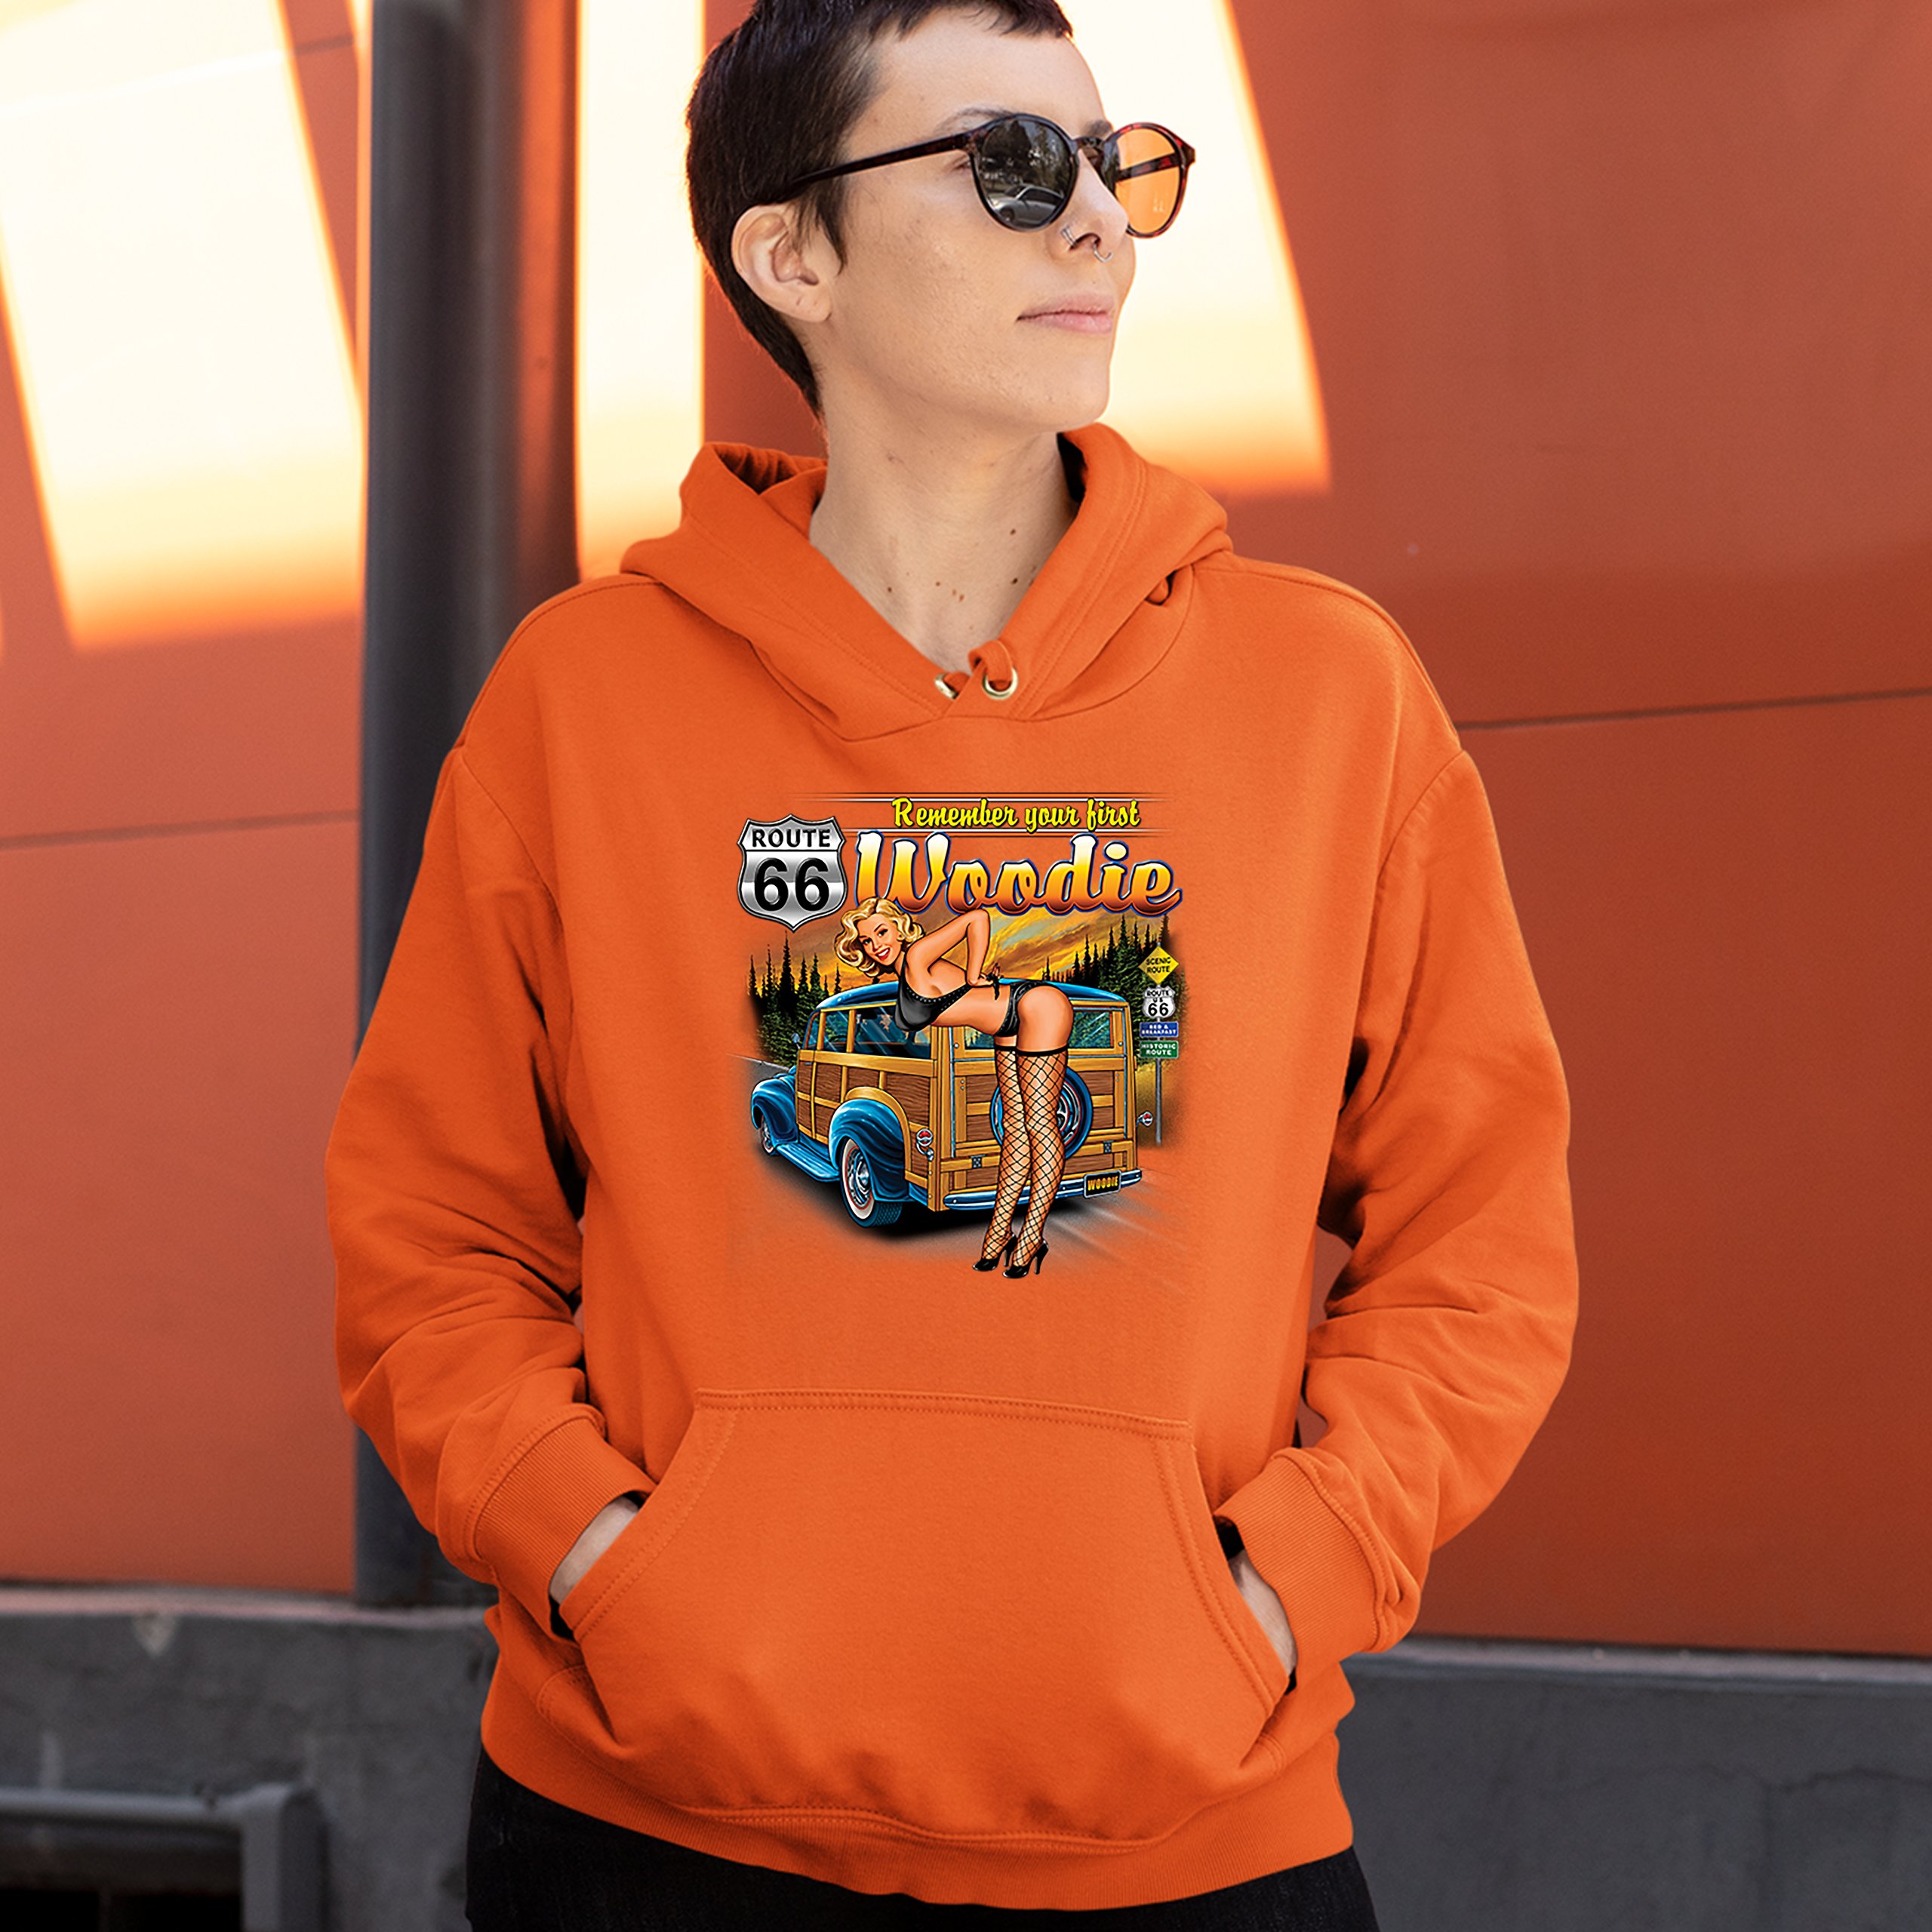 Remember Your First Woodie Sweatshirt Route 66 Sexy Pin-up Girl Hoodie ...